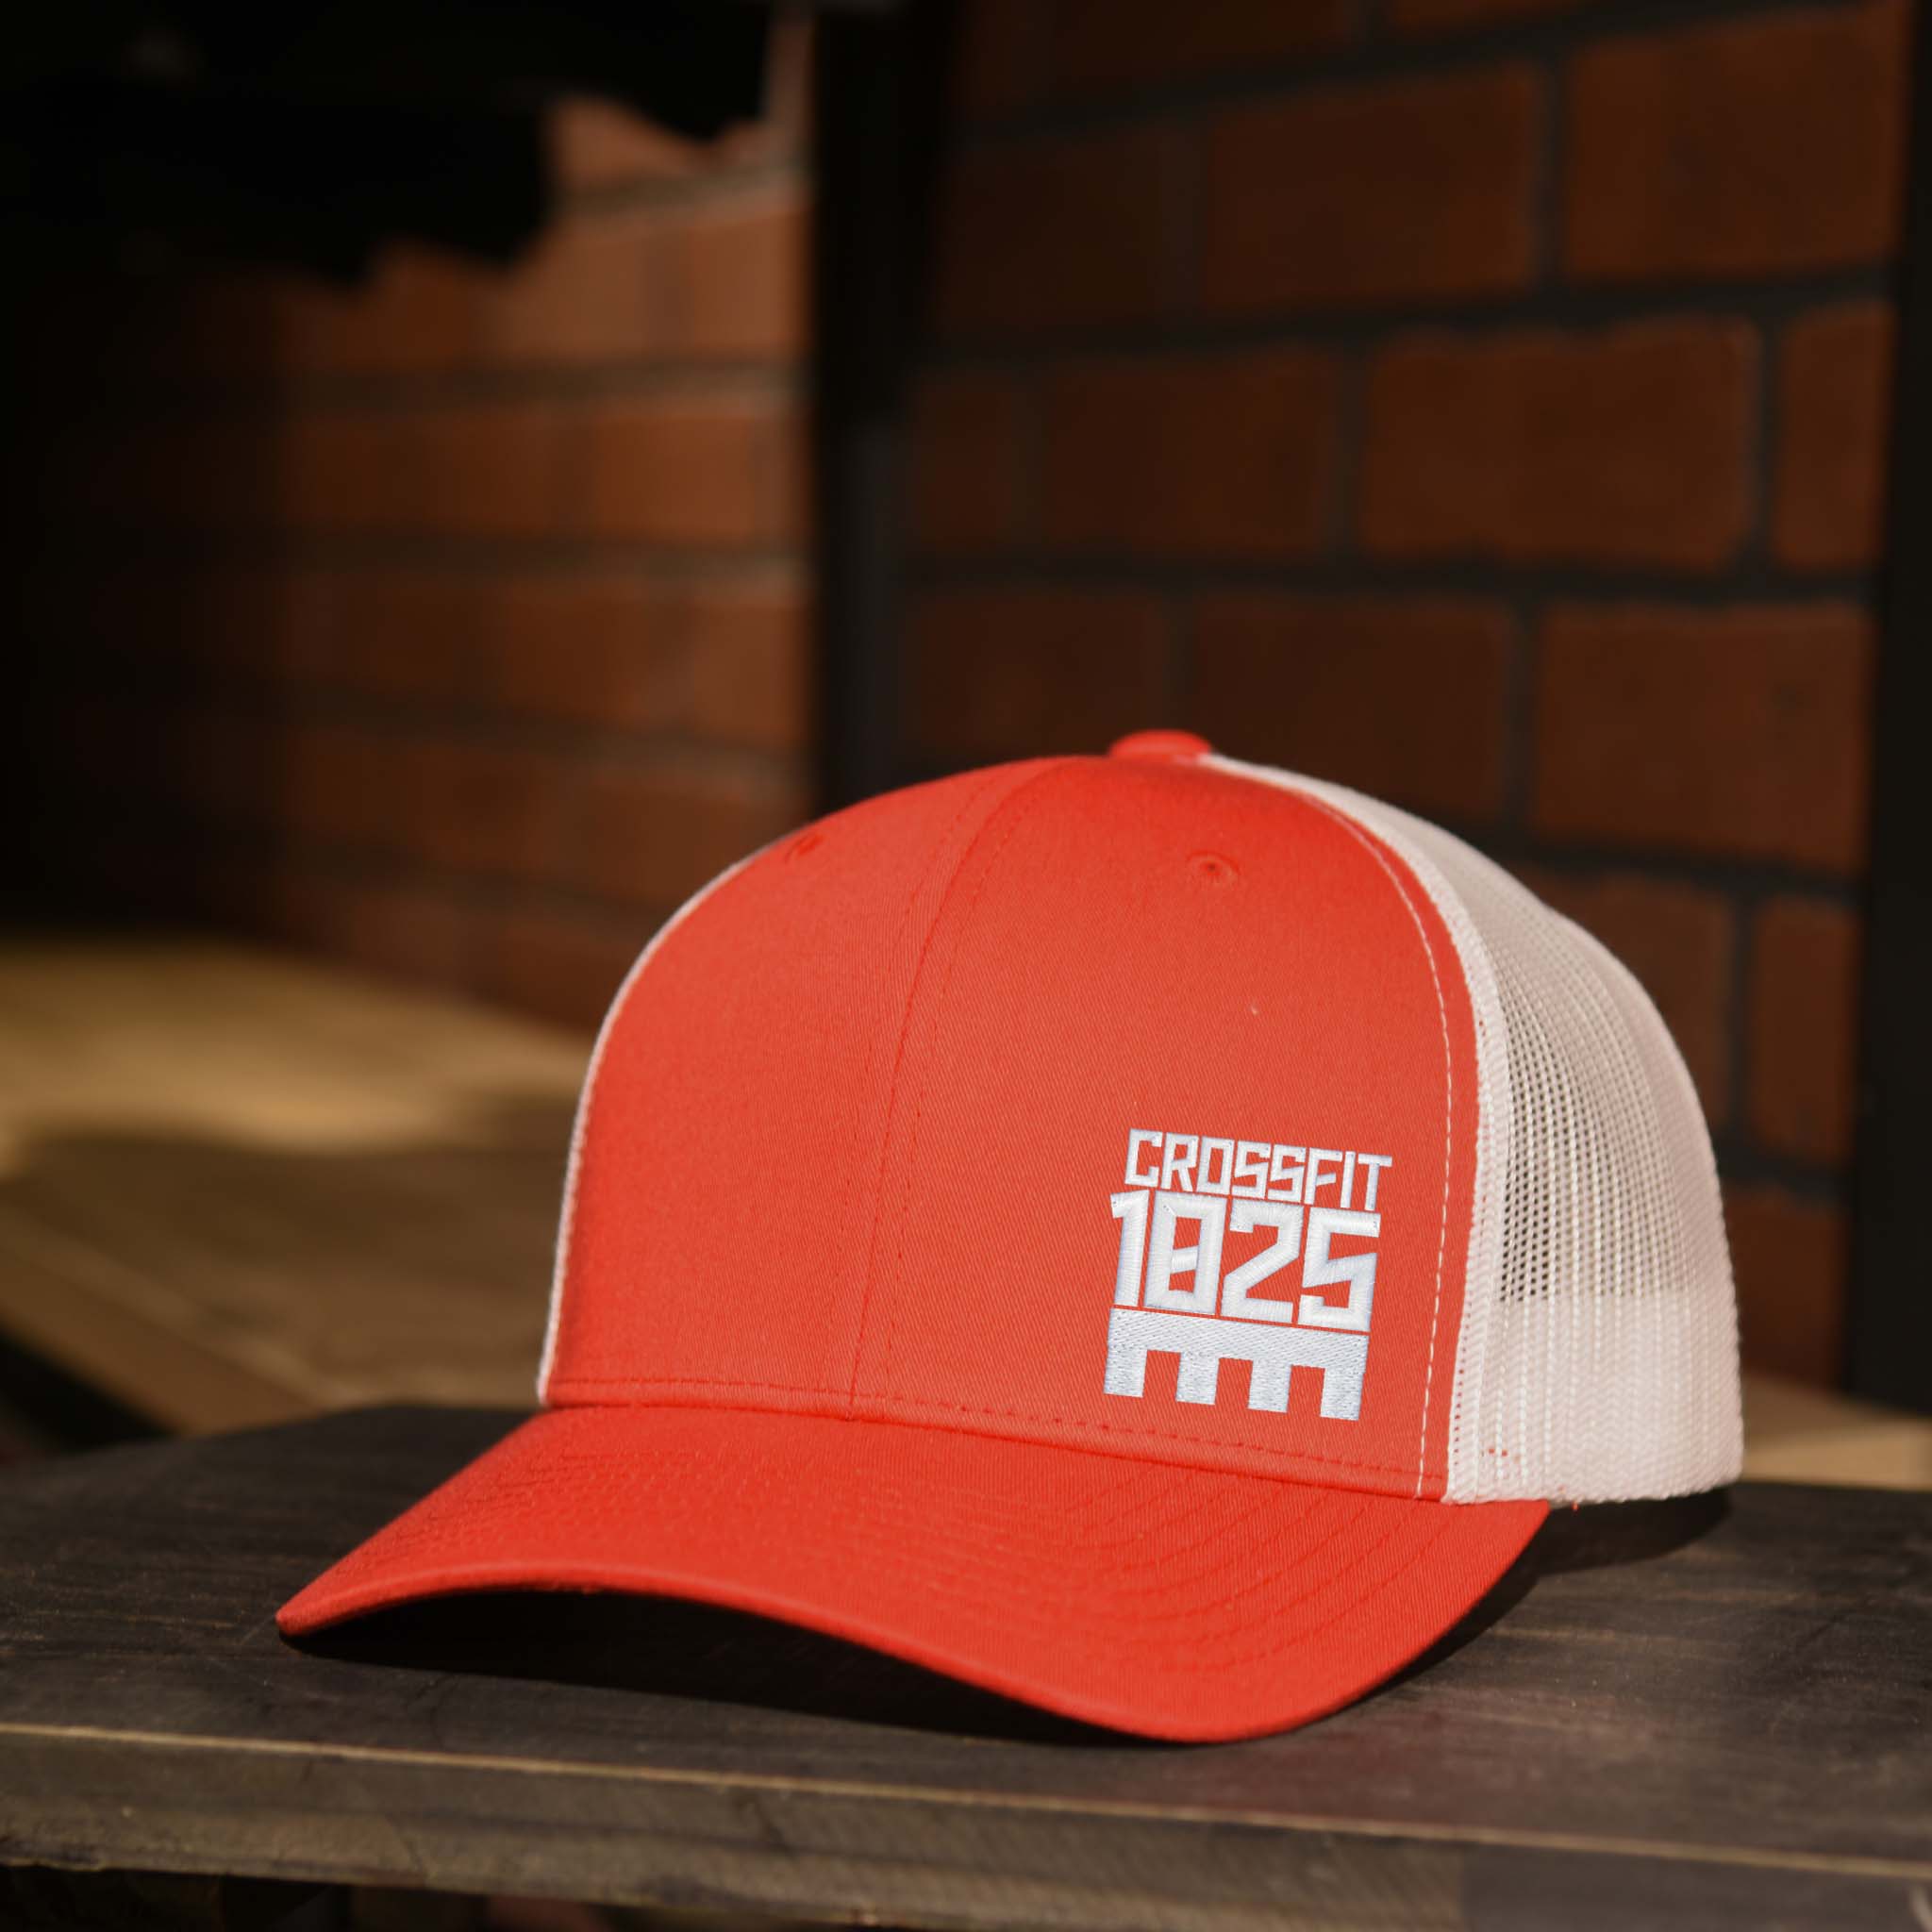 CrossFit 1825 White Embroidered Logo Trucker Hat in Red and White